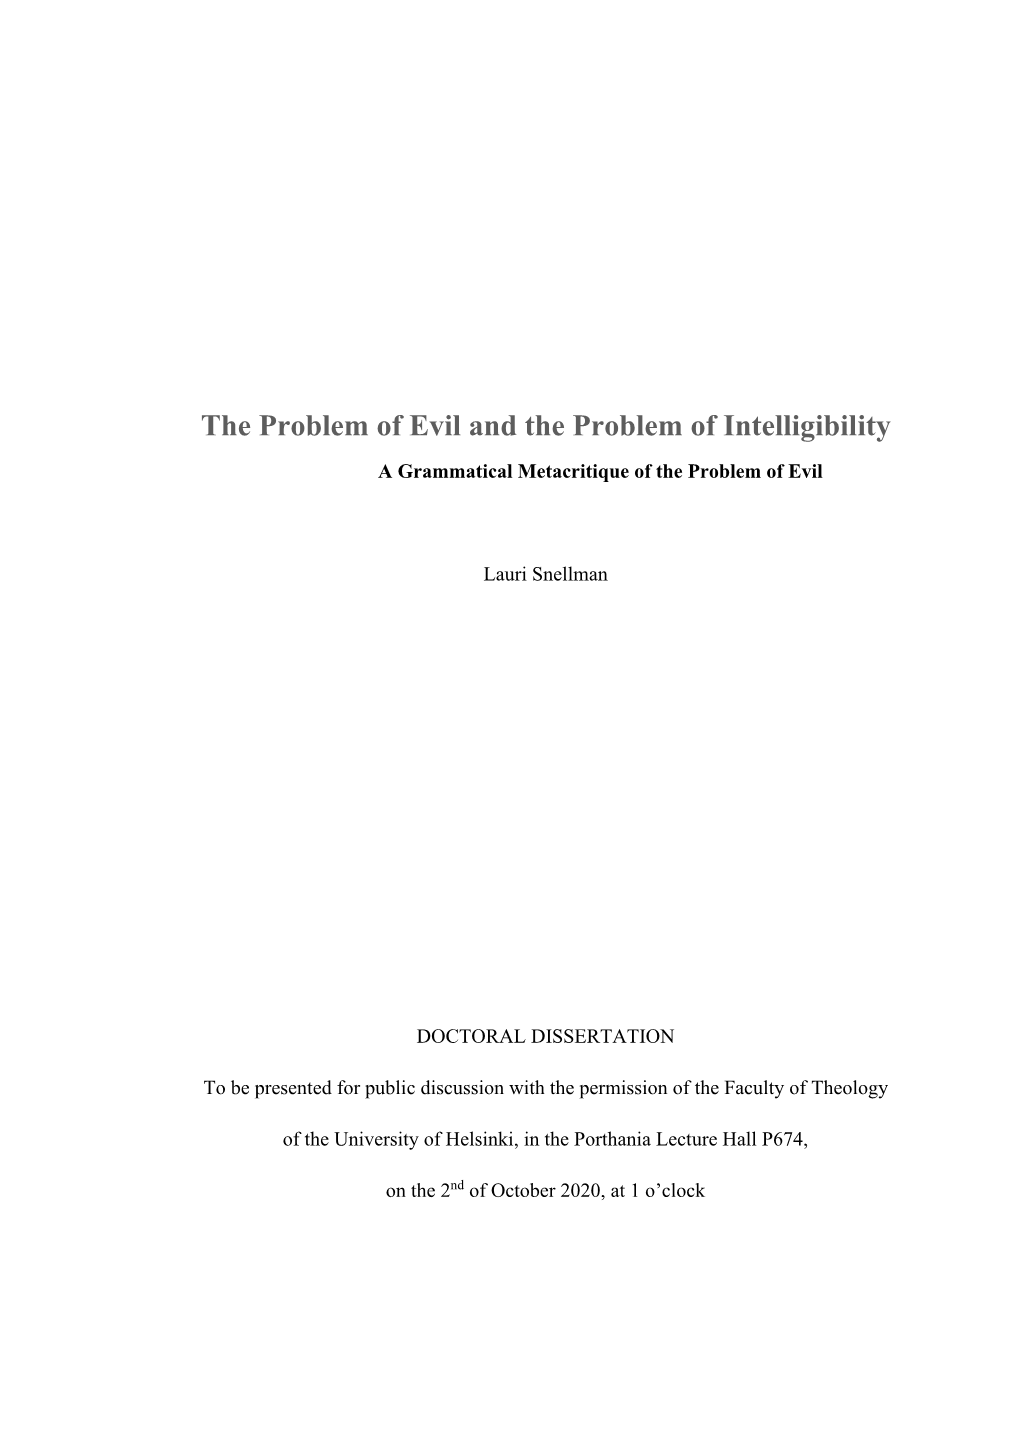 The Problem of Evil and the Problem of Intelligibility